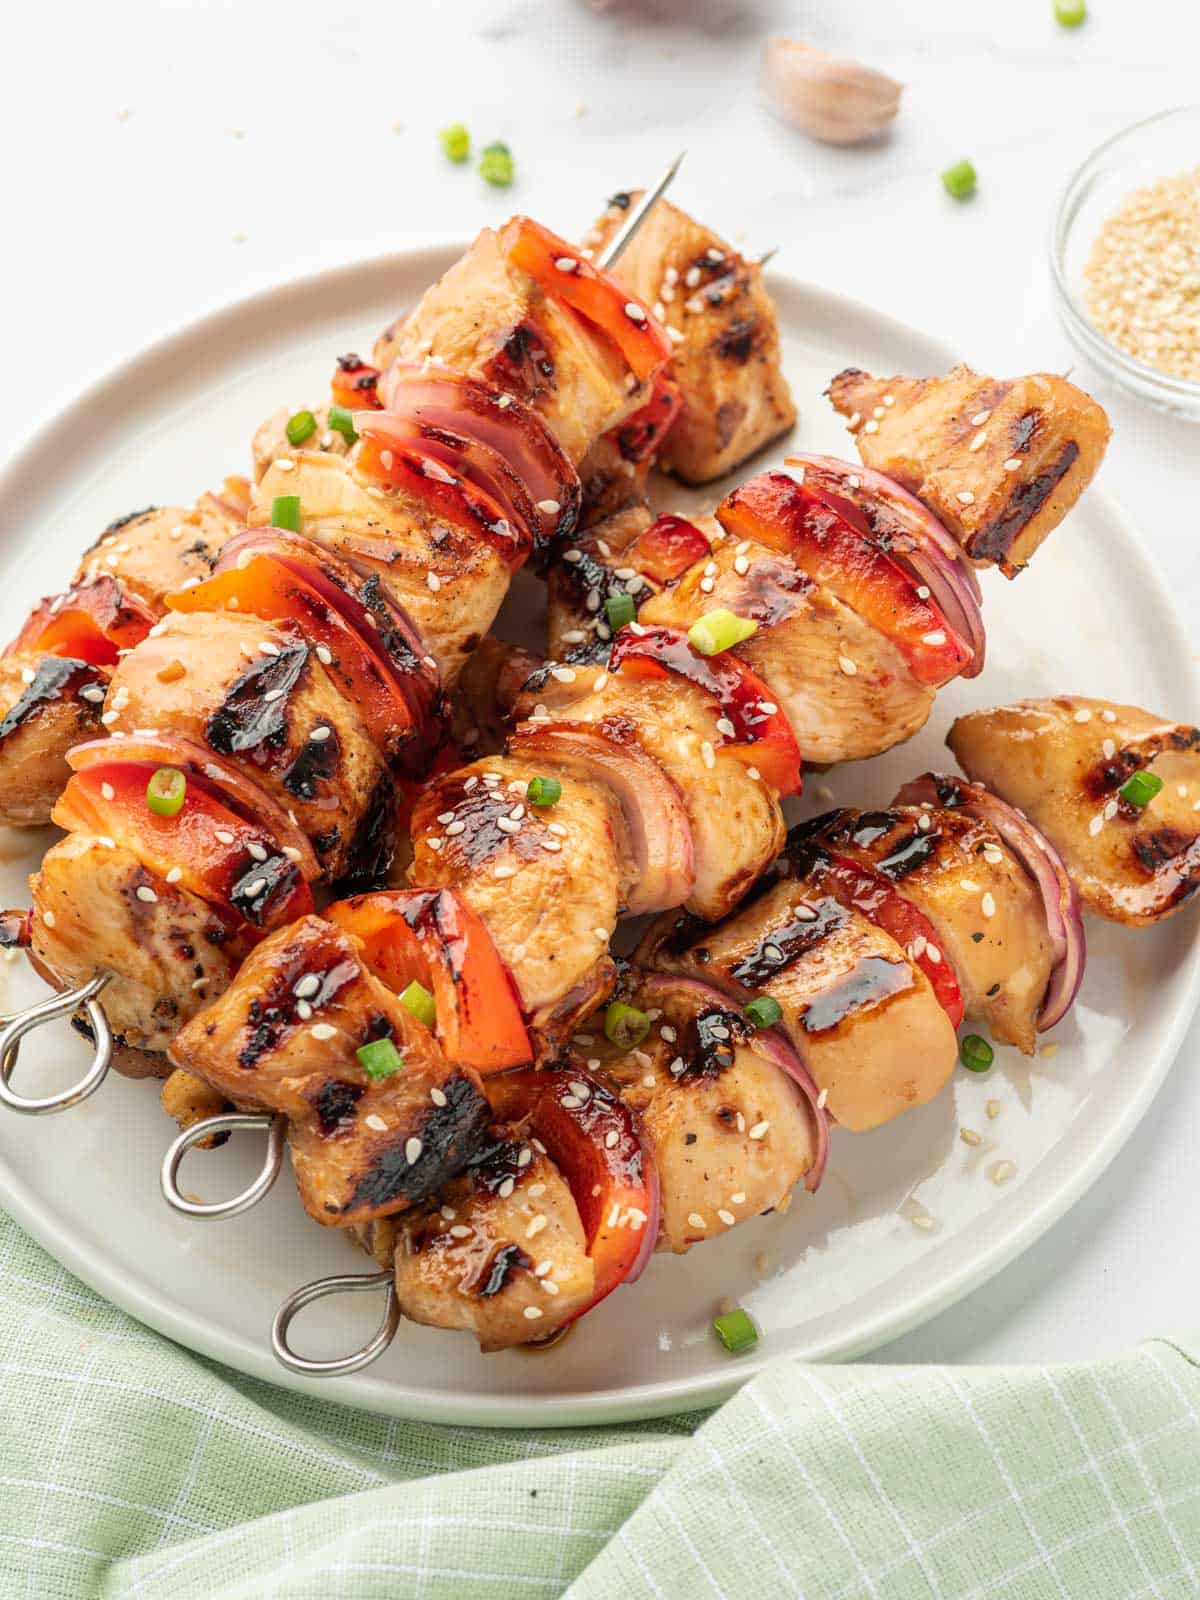 Grilled chicken skewers with honey and garlic on a platter.